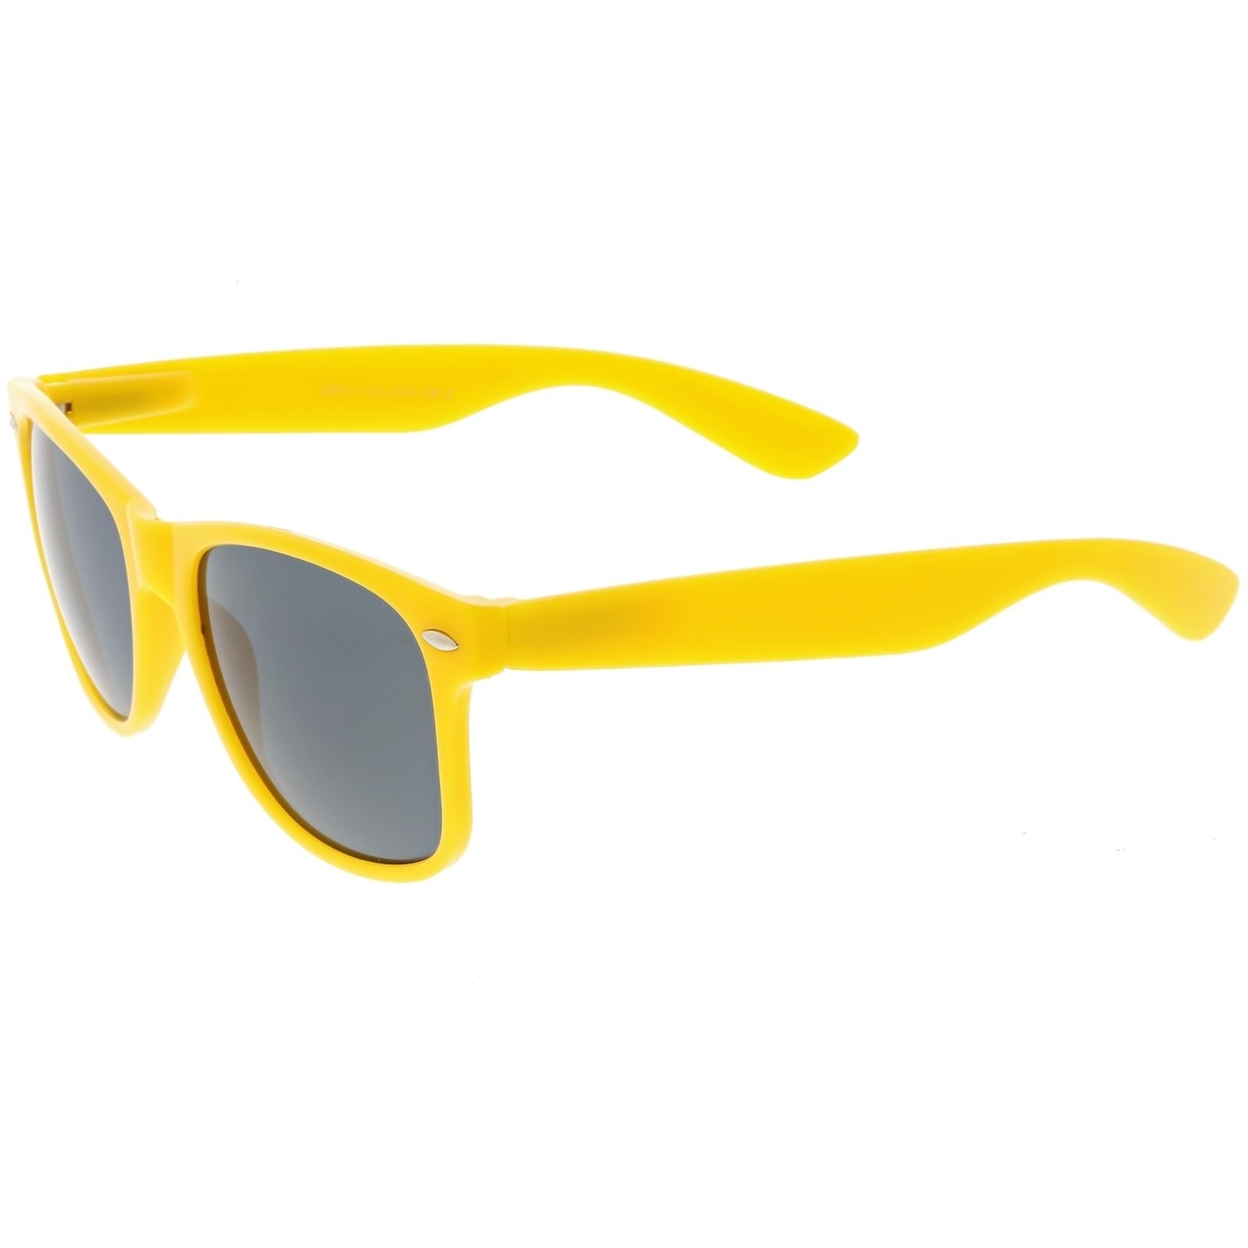 Modern Horn Rimmed Sunglasses Wide Arms Neutral Colored Square Lens 52mm - Yellow / Smoke